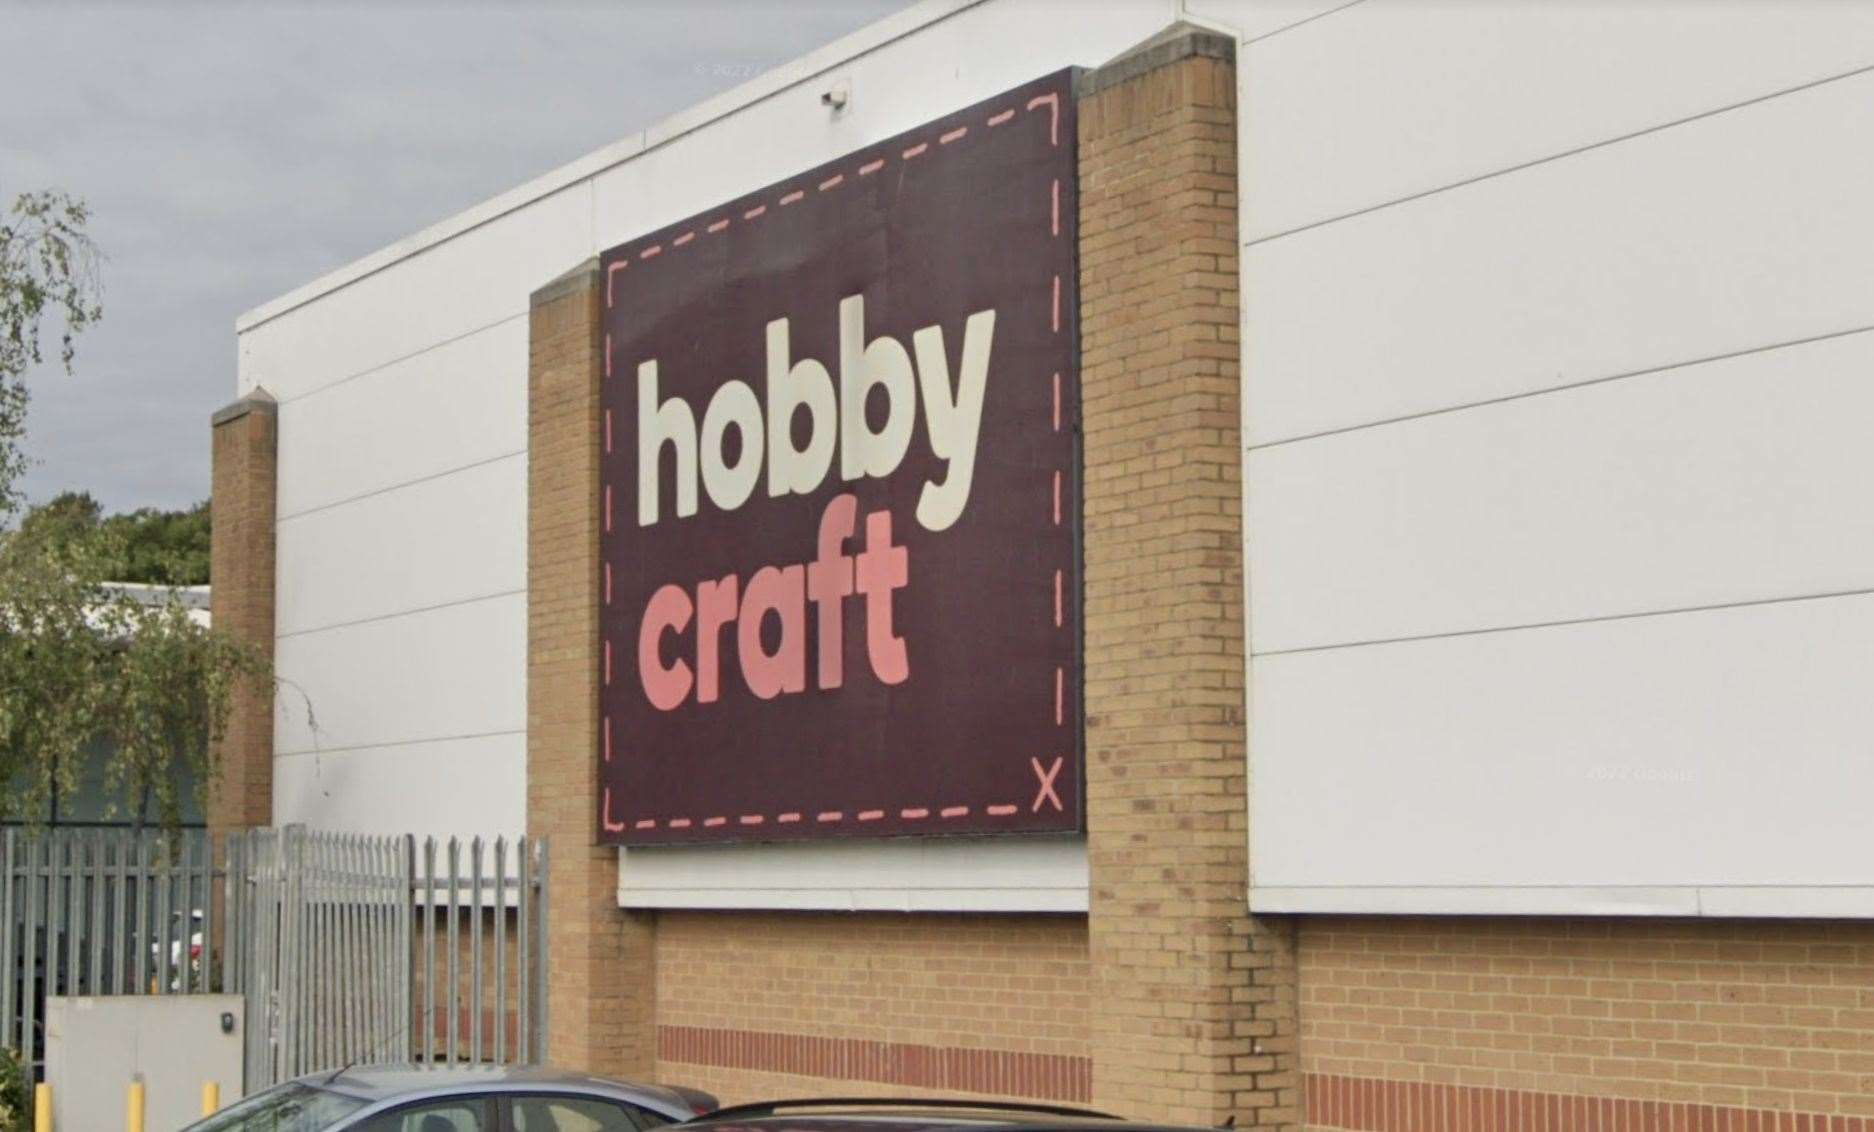 Hobbycraft in Maidstone. Picture: Google